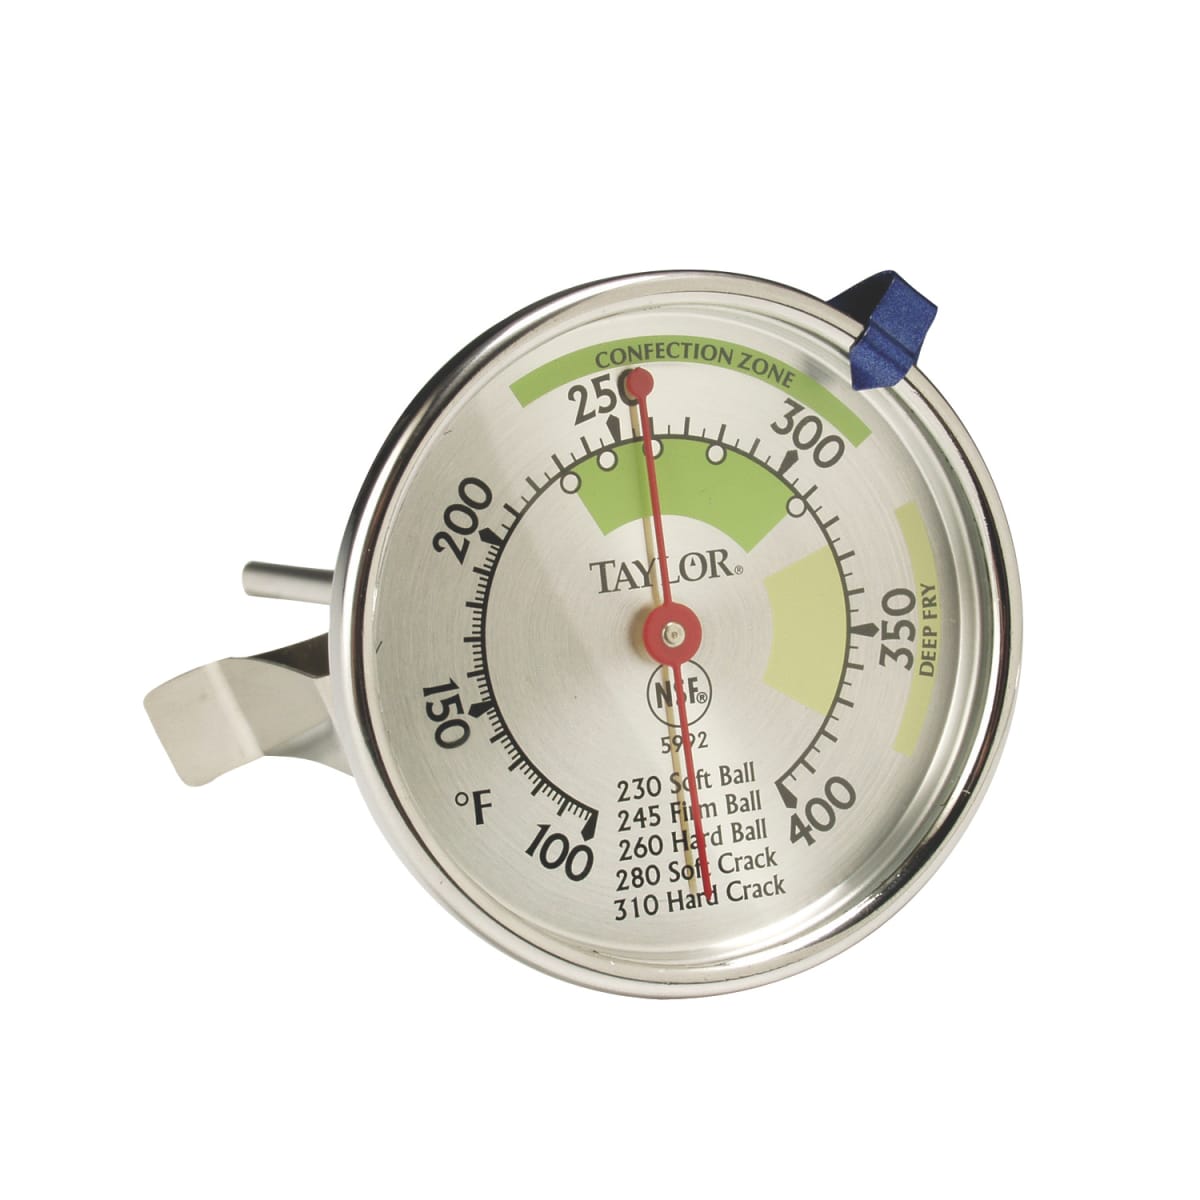 Taylor Candy and Deep Fry Dial Thermometer with Adjustable Pan Clip  Stainless Steel